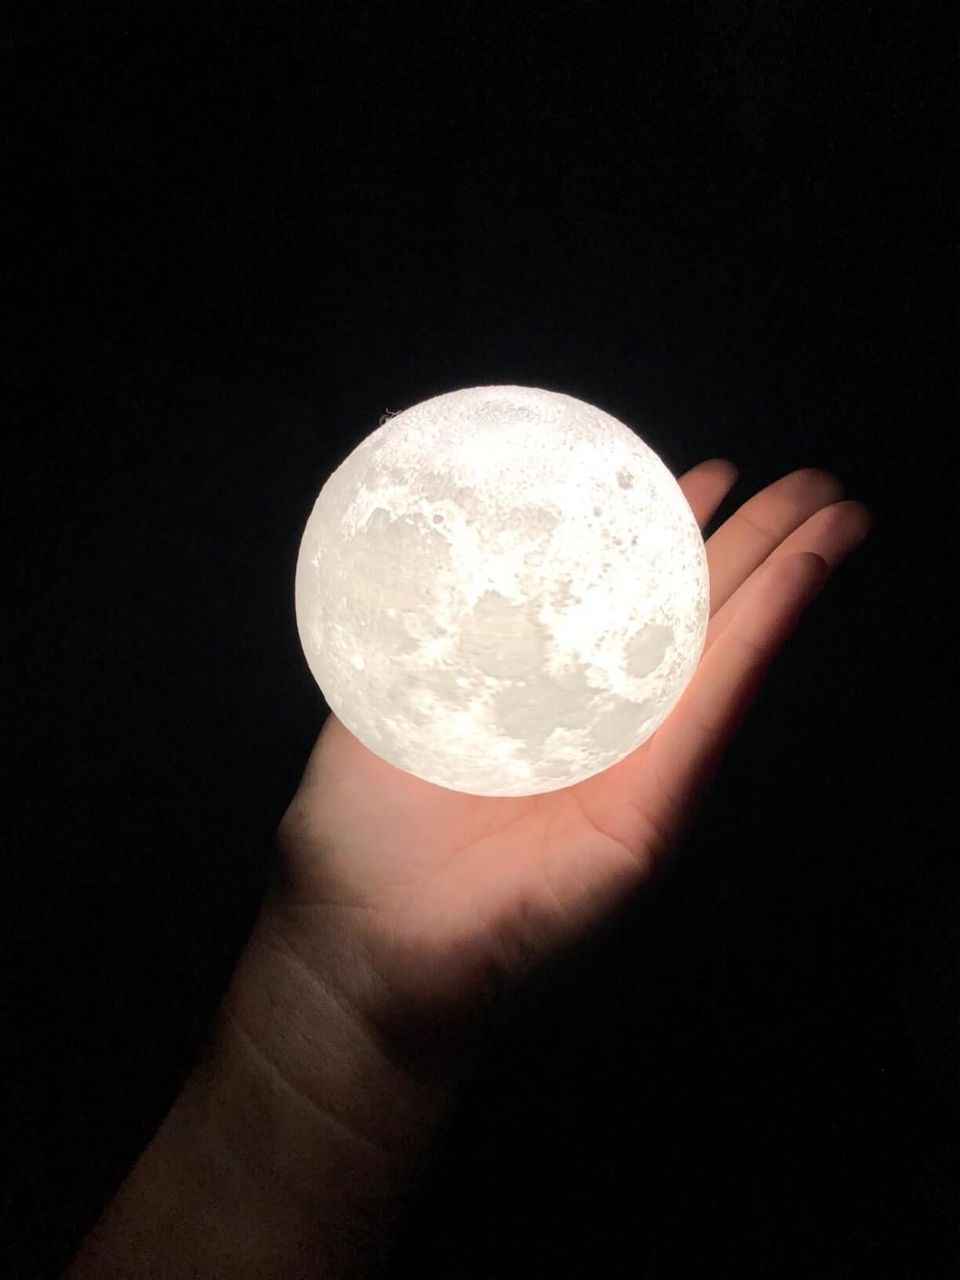 An incredibly detailed, dual color moon-shaped light